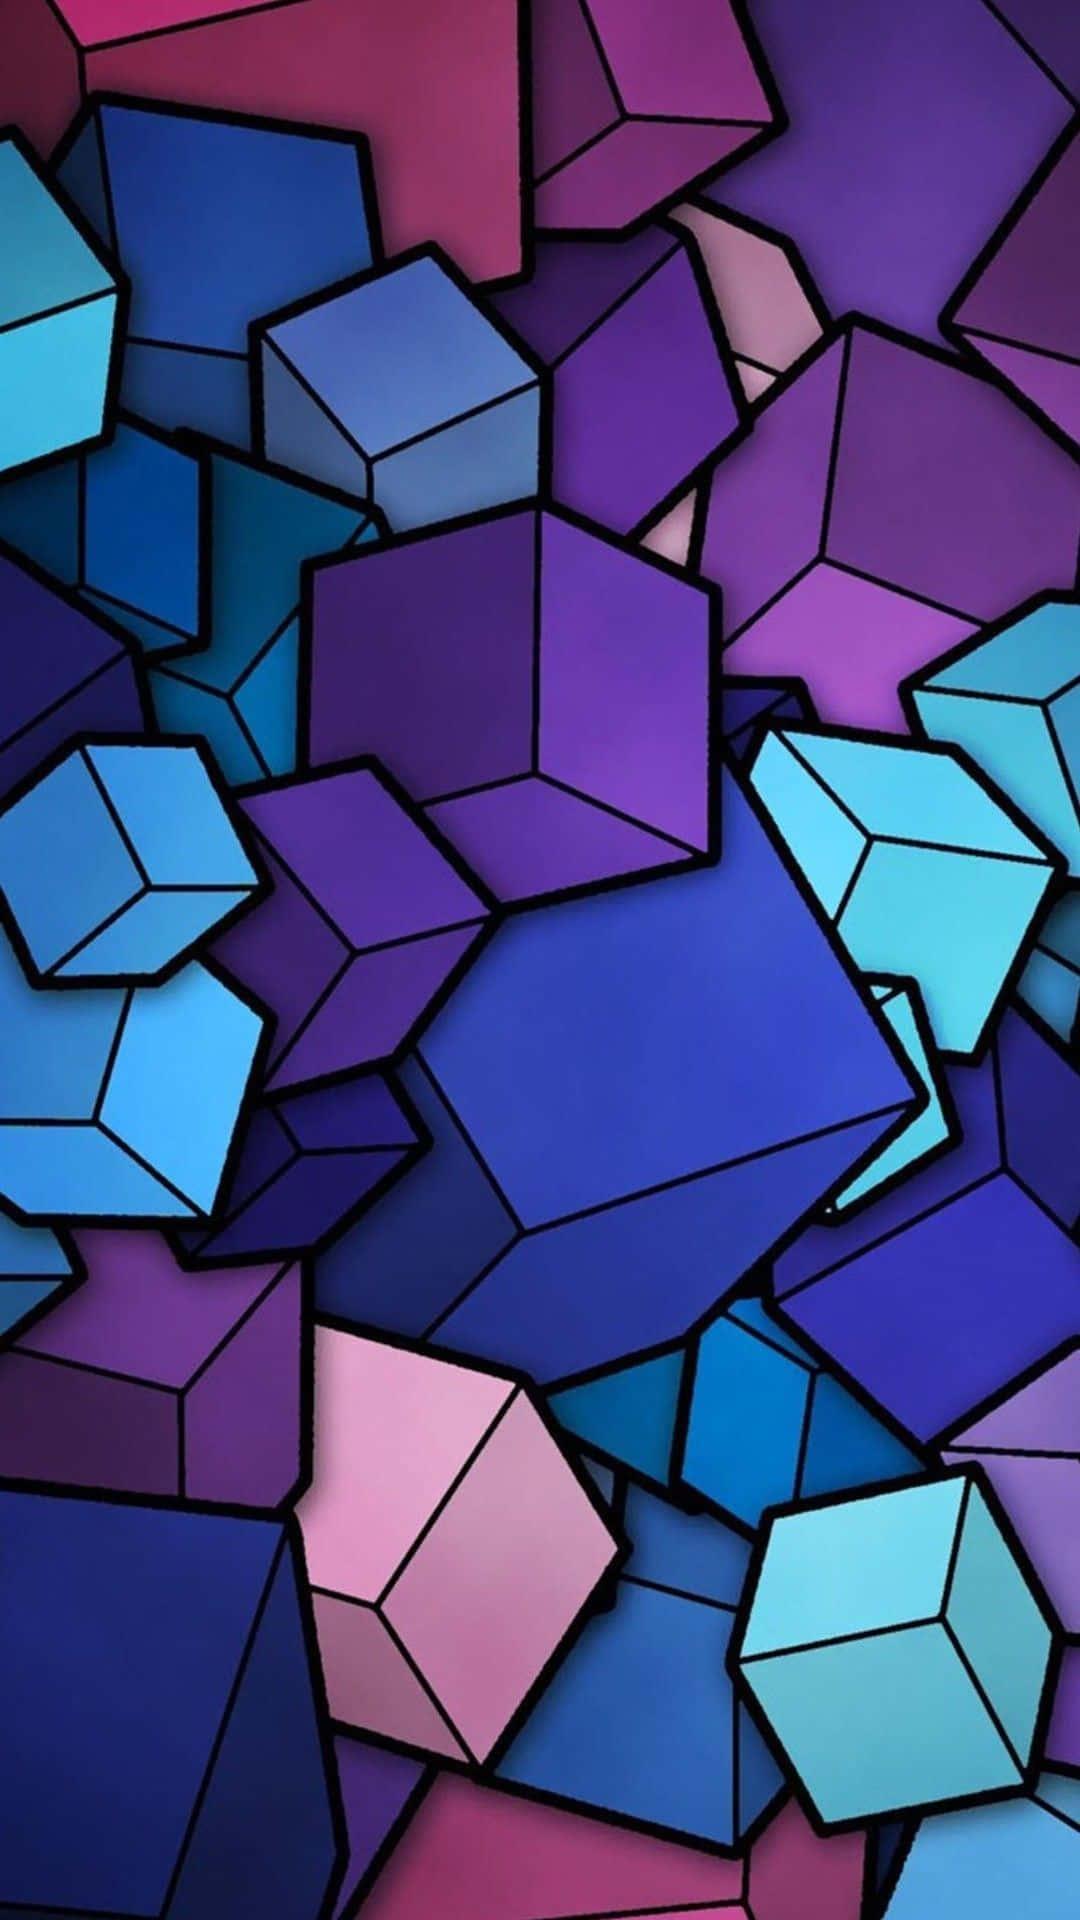 A Colorful Background With Many Colorful Cubes